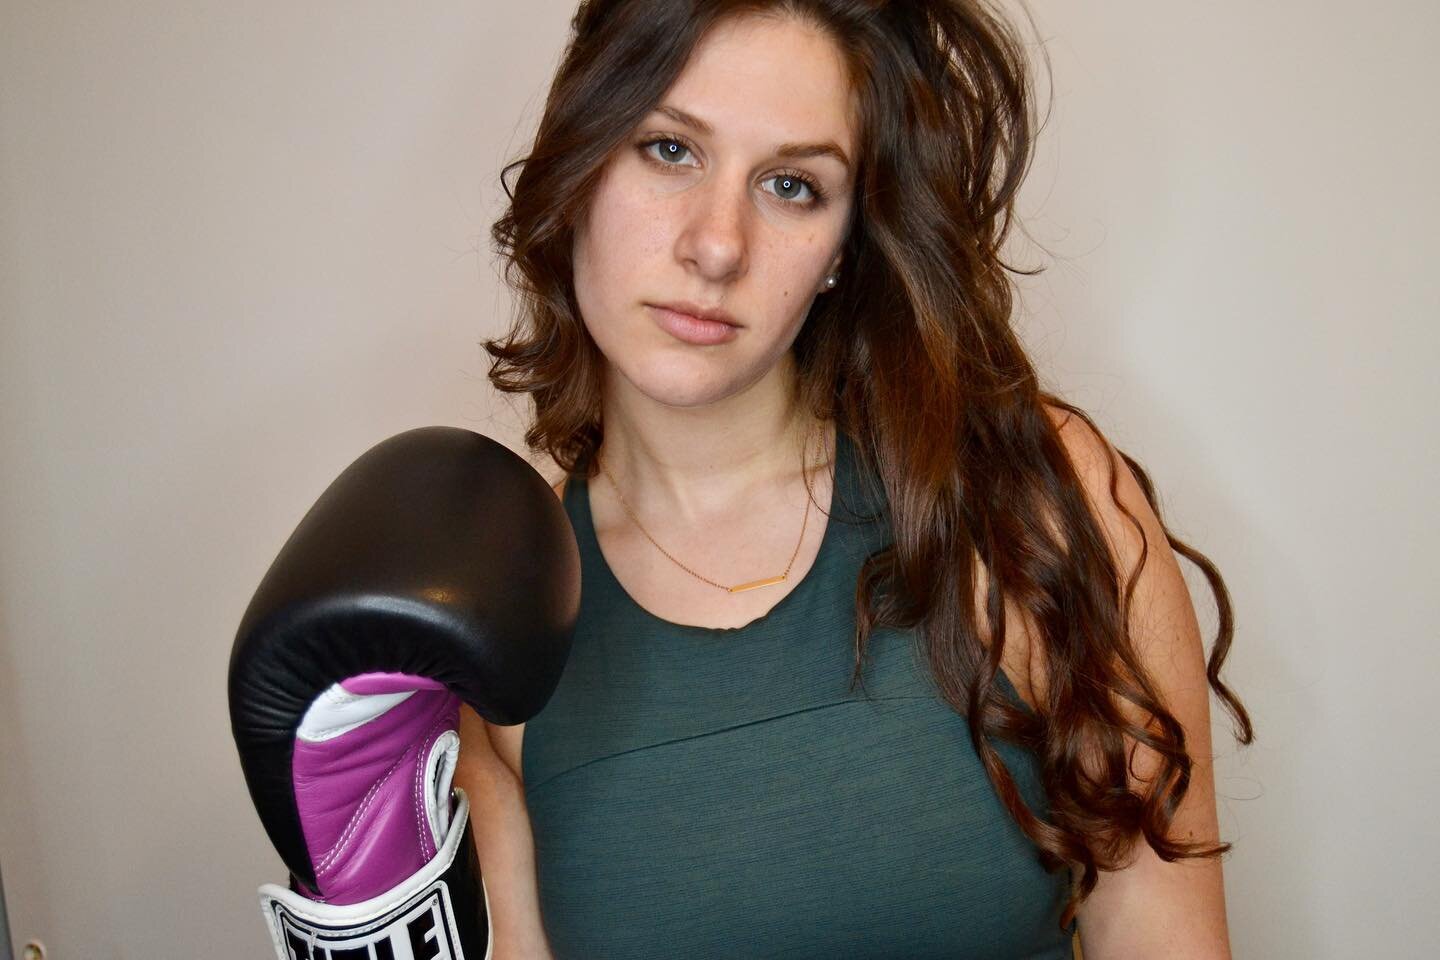 I teach boxing in my bedroom so I did a photo shoot in my bedroom

➡️ HMU at @kickat55 
🥊 Gloves &amp; job thnx to @alexhopekramer 

#fitness #boxing #workoutathome  #fitpro #hiit #wearamask #getavaccine #barre #fitspo